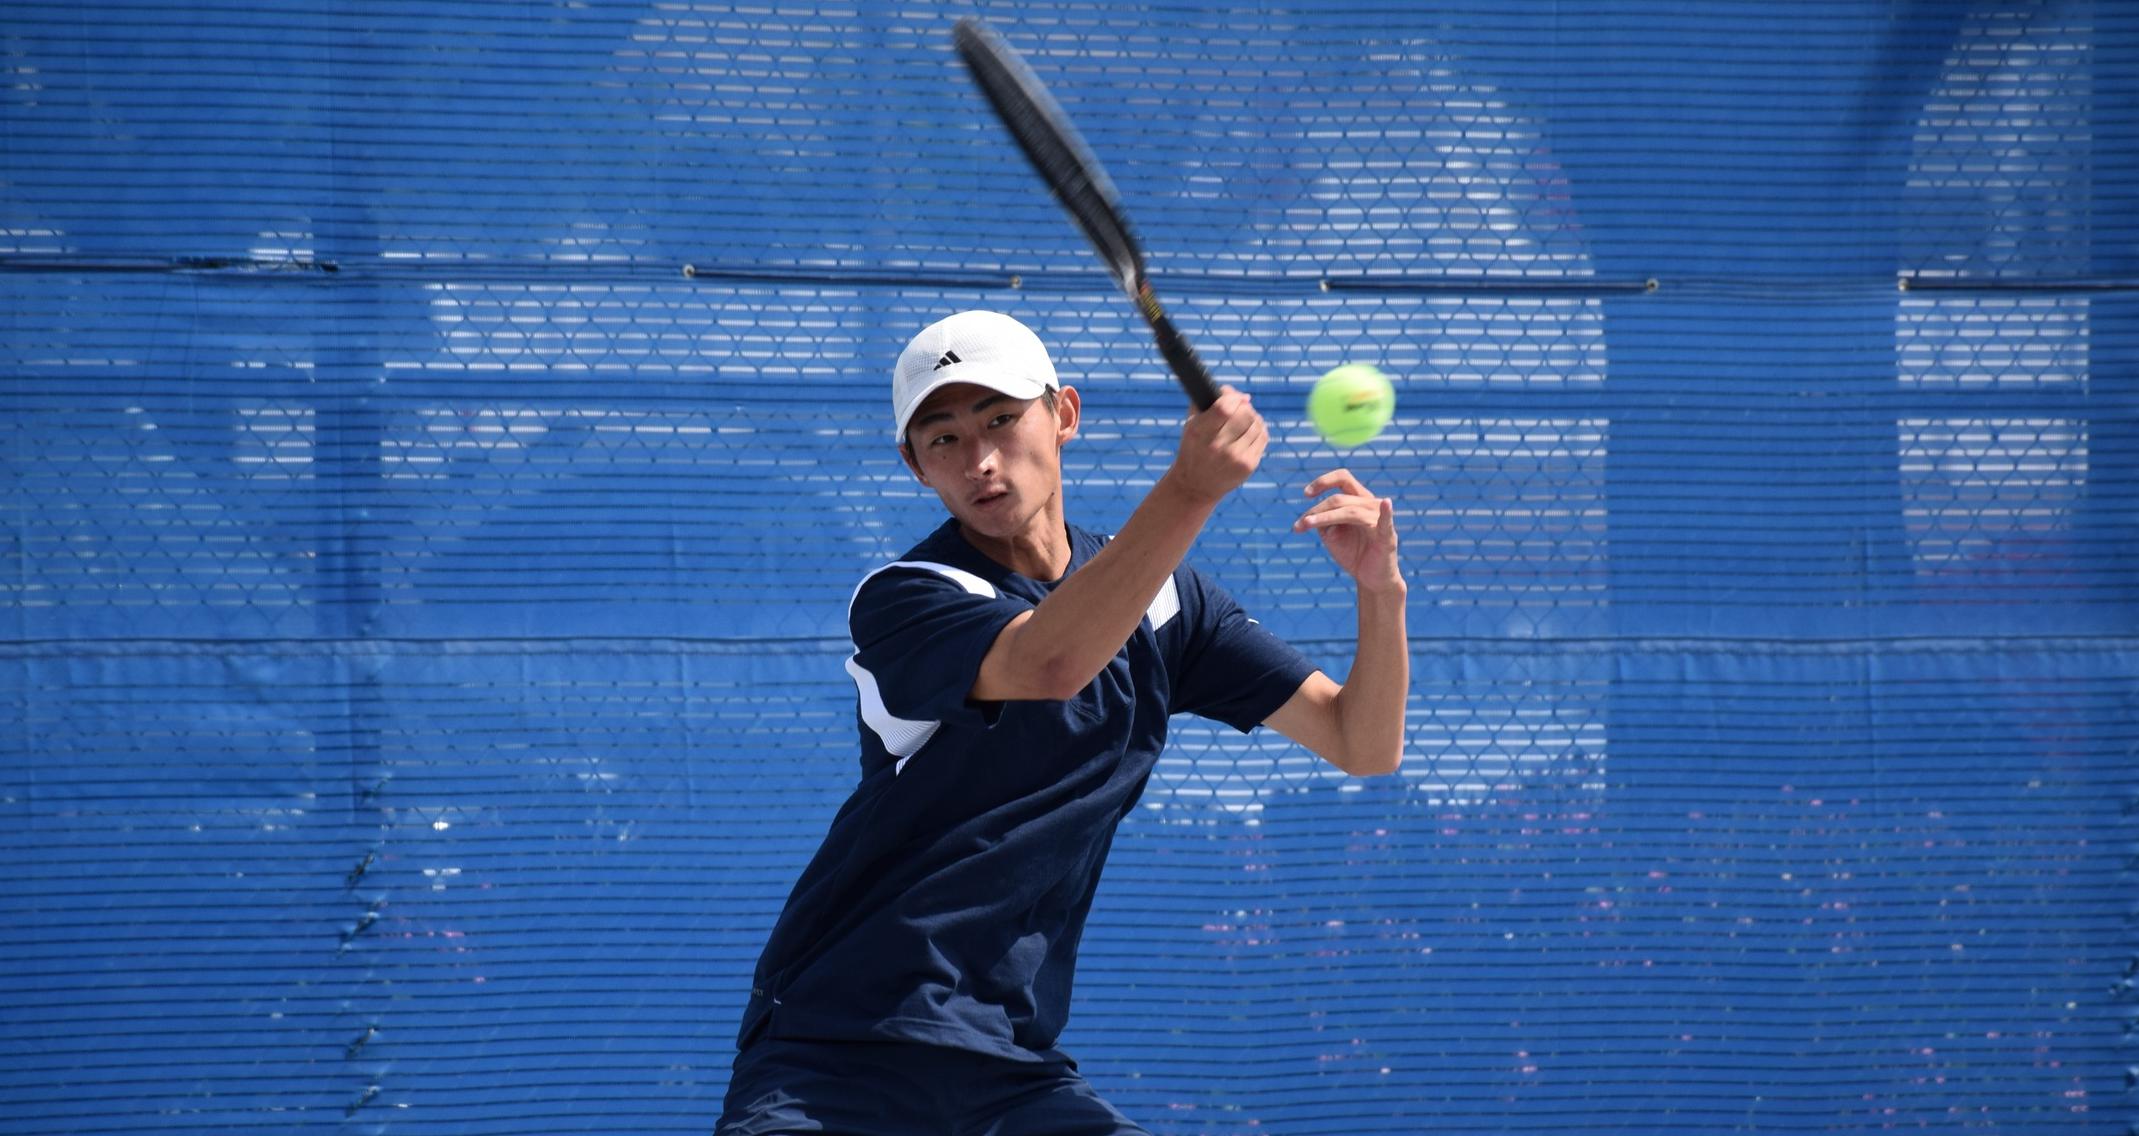 Men's tennis team sweeps opponent for third time this season